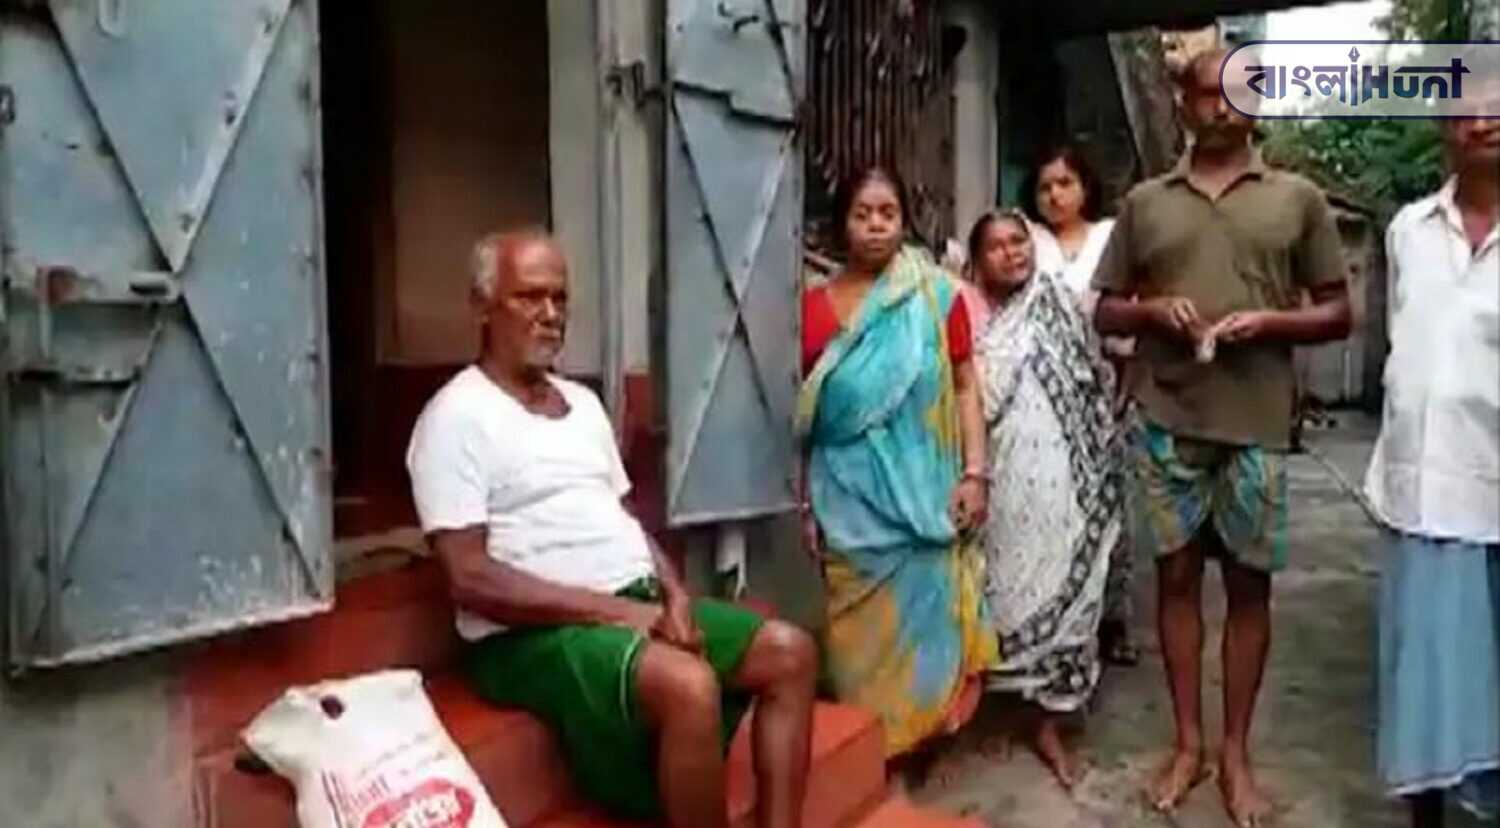 80-year-old man old man did not get the vaccine, because his son is a BJP activist